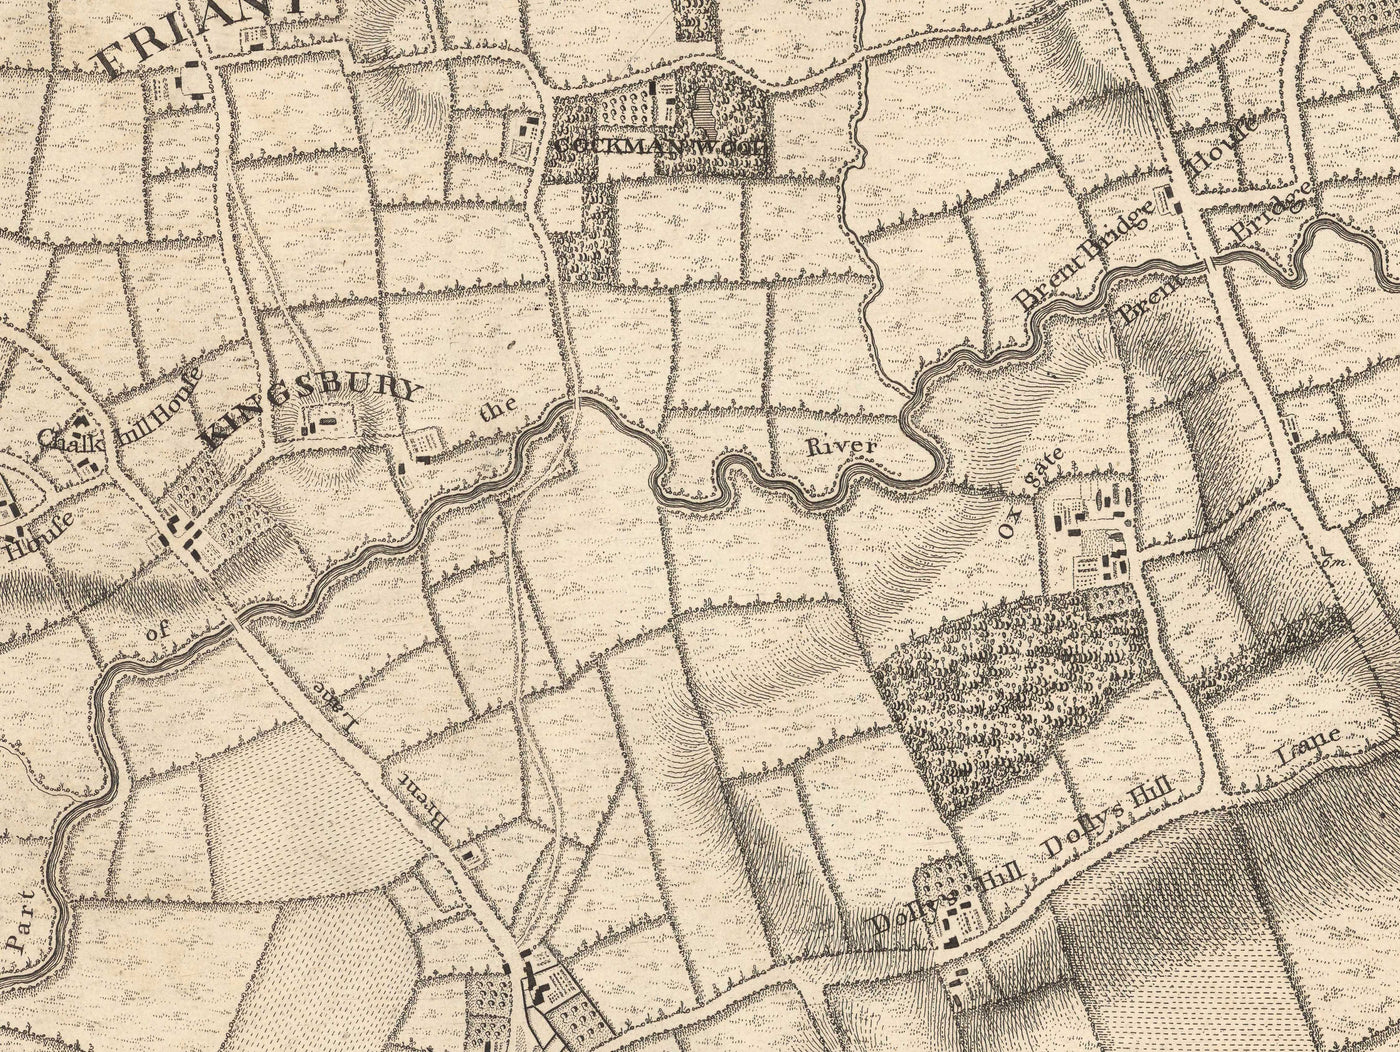 Old Map of West and North West London in 1746 by John Rocque - Hampstead, Kingsbury, Neasden, Willesden, West End, NW2, NW3, NW5, NW6, NW8, NW10, W9, W10